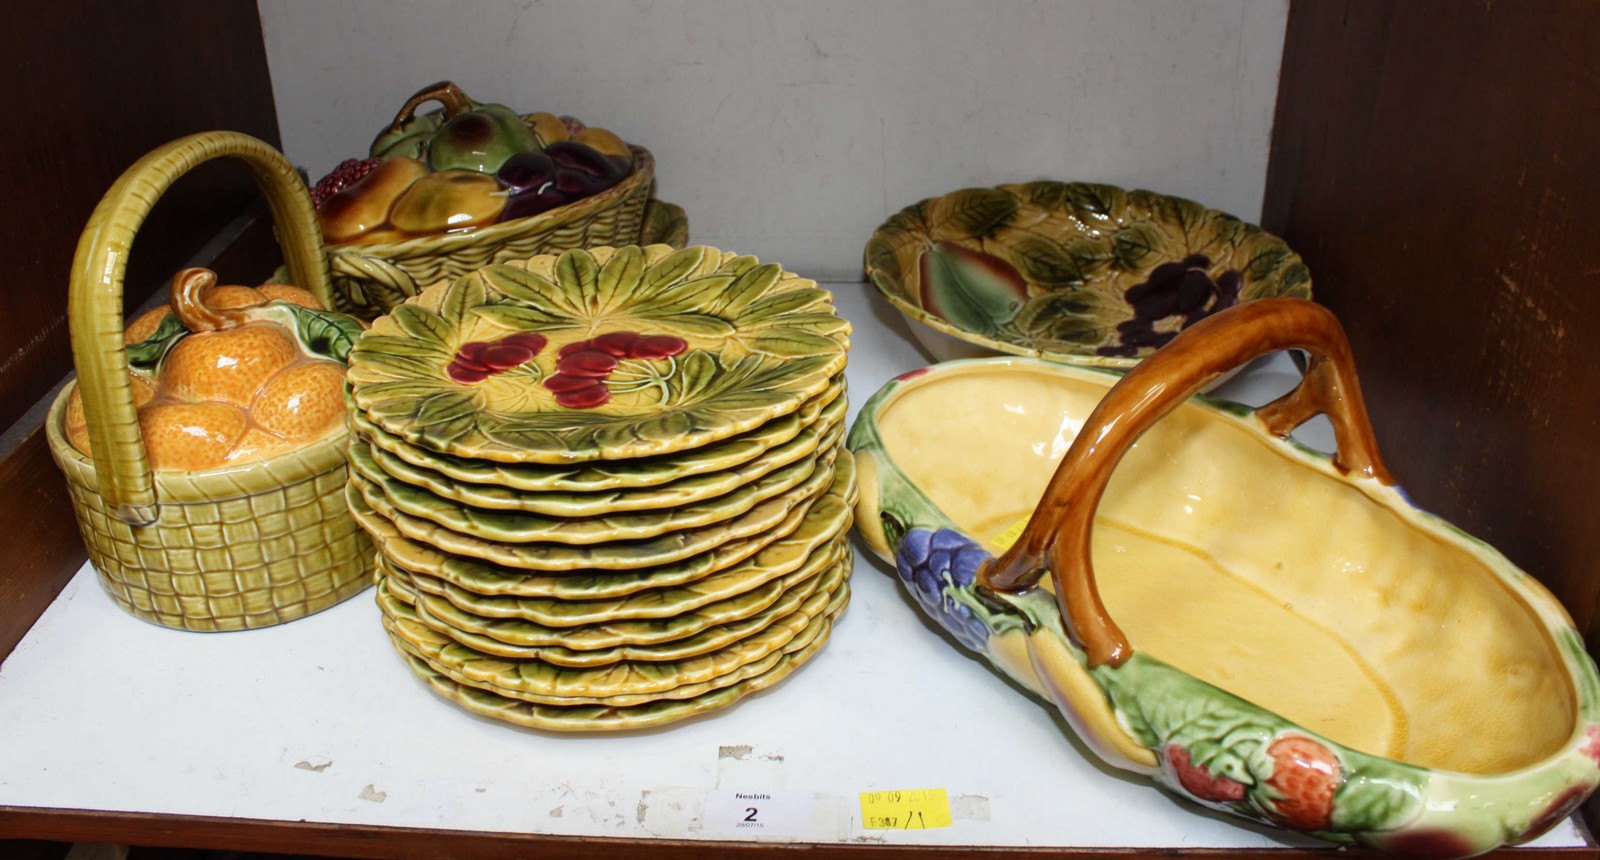 SECTION 2. A collection of Sarreguemines pottery fruit plates and tureens.